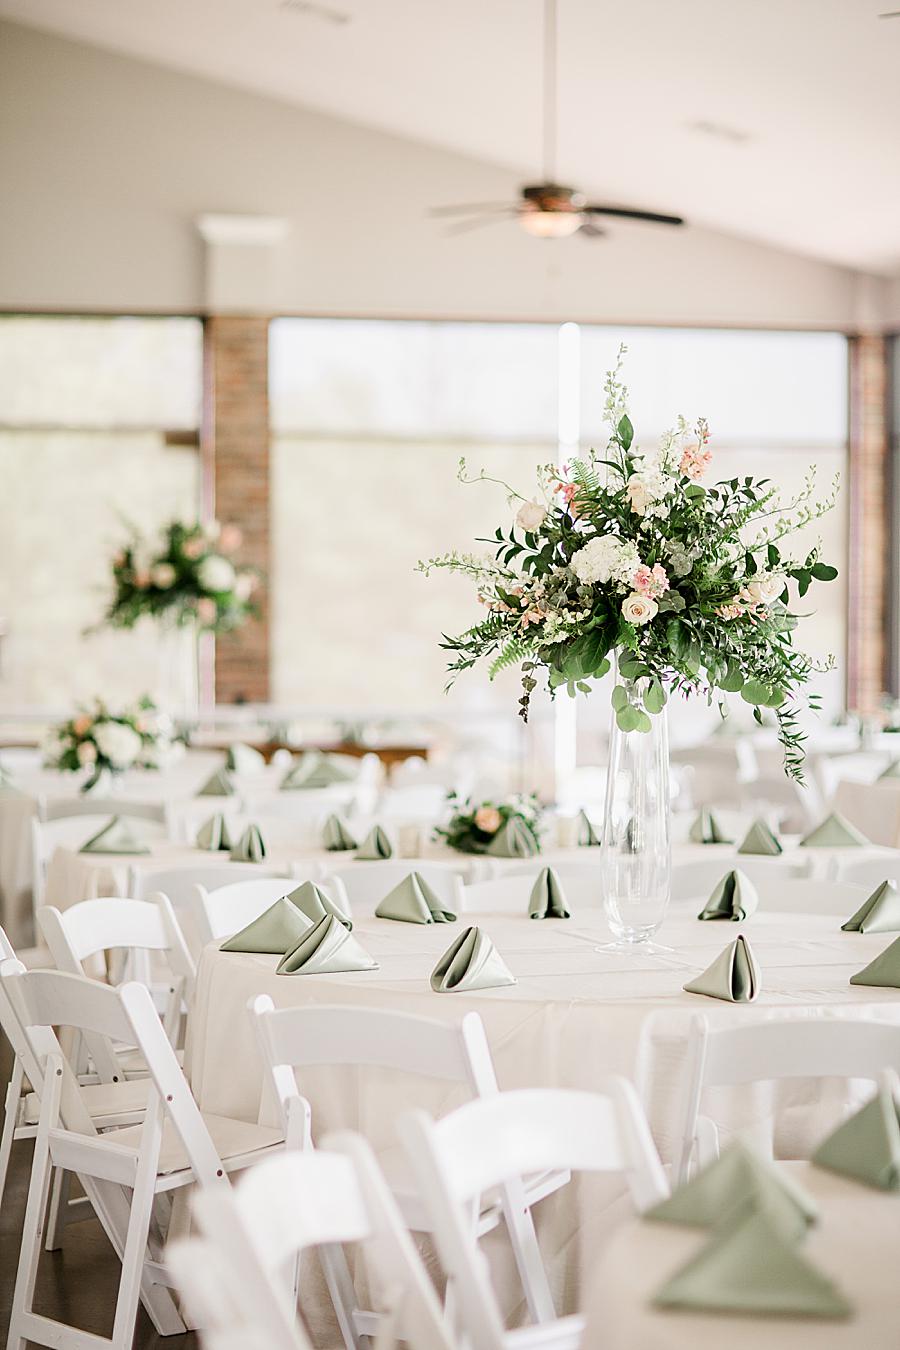 Reception layout at this pavilion wedding by Knoxville Wedding Photographer, Amanda May Photos.